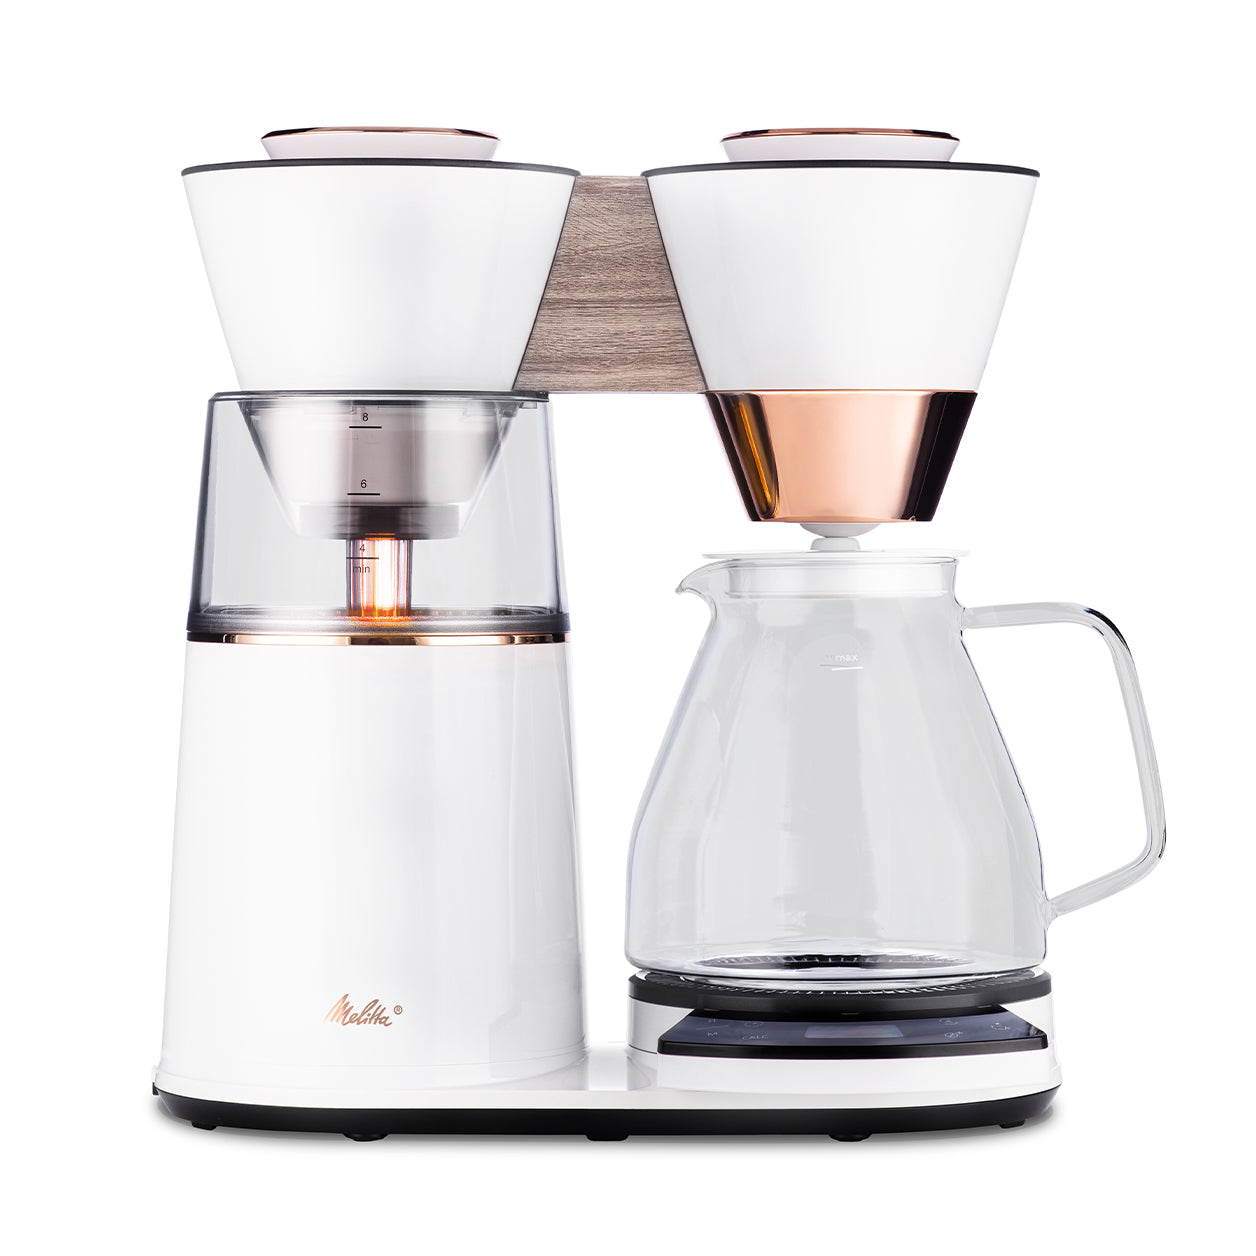 Cuisinart®  Programming your coffeemaker to AUTO ON 